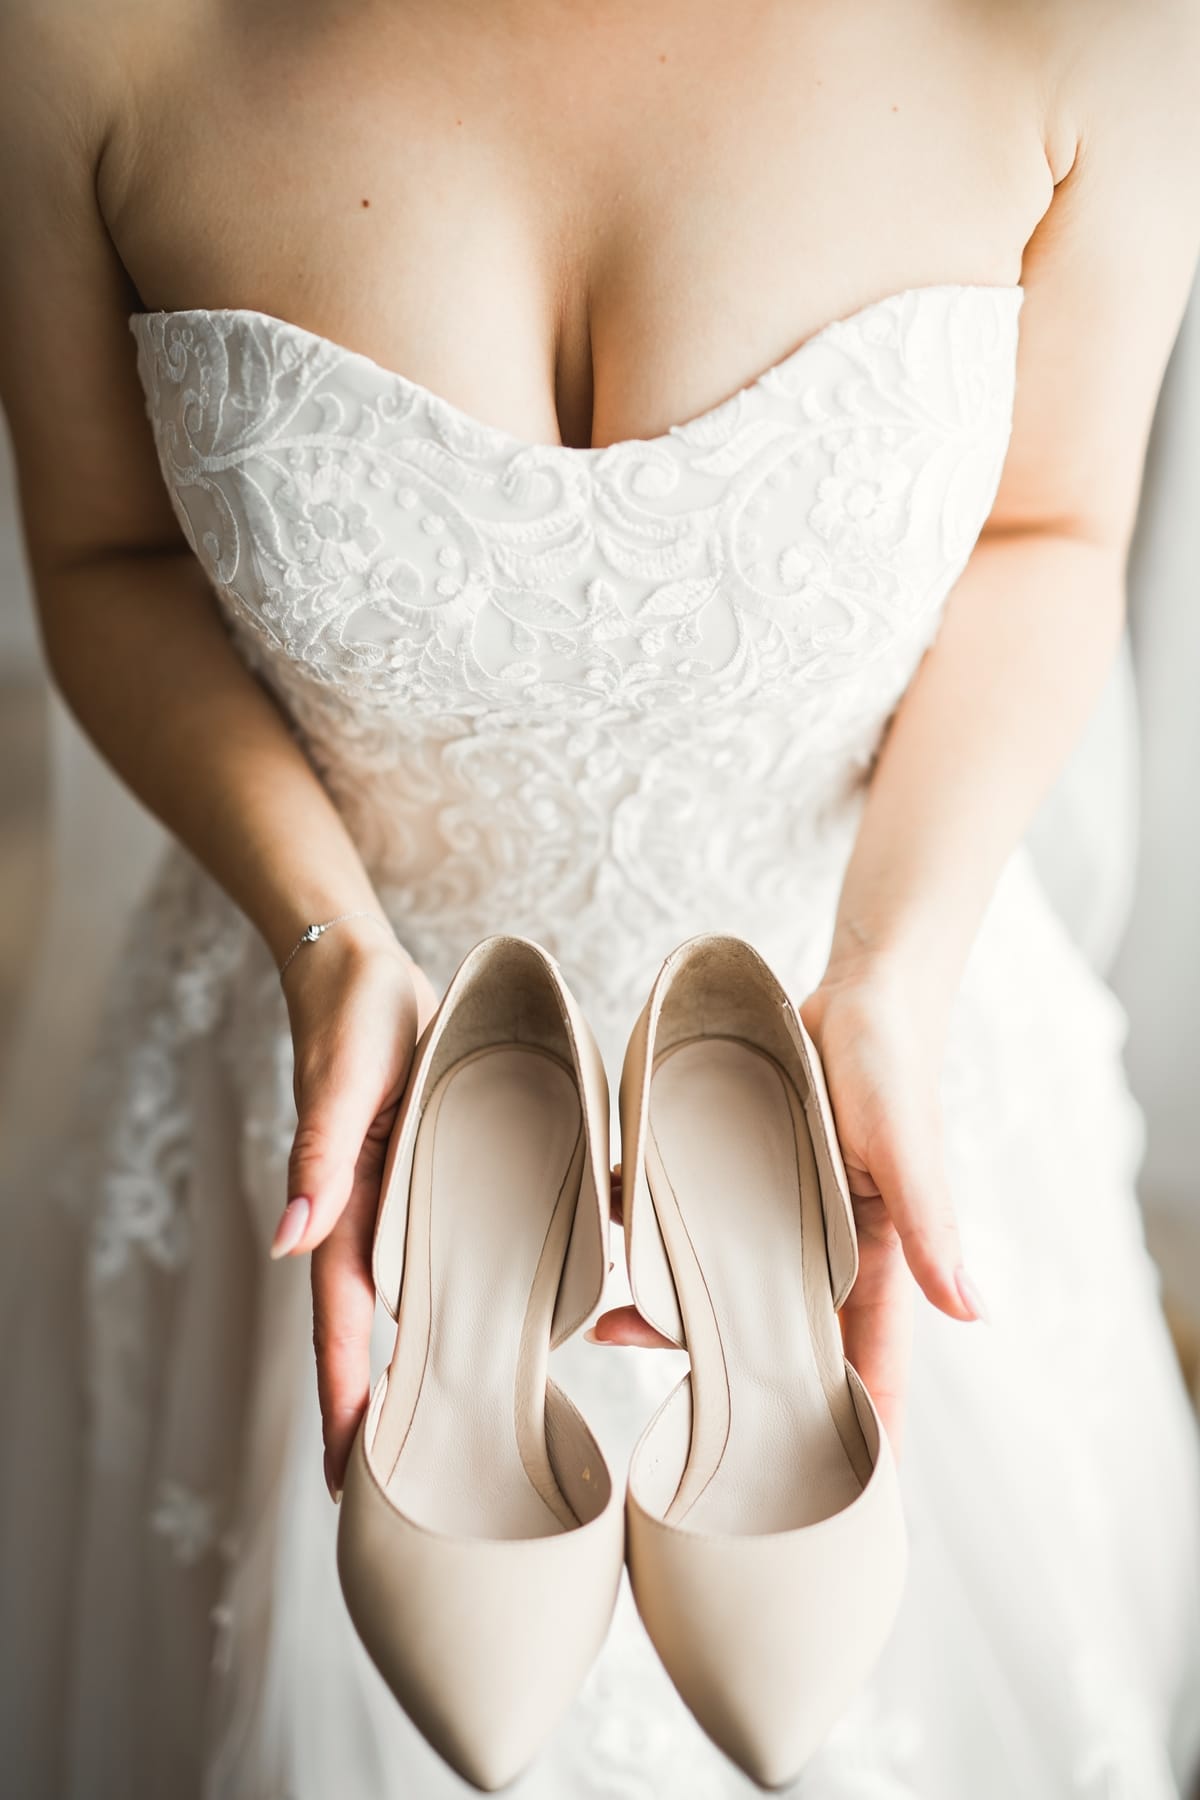 You should buy your bridal shoes in good time before your wedding